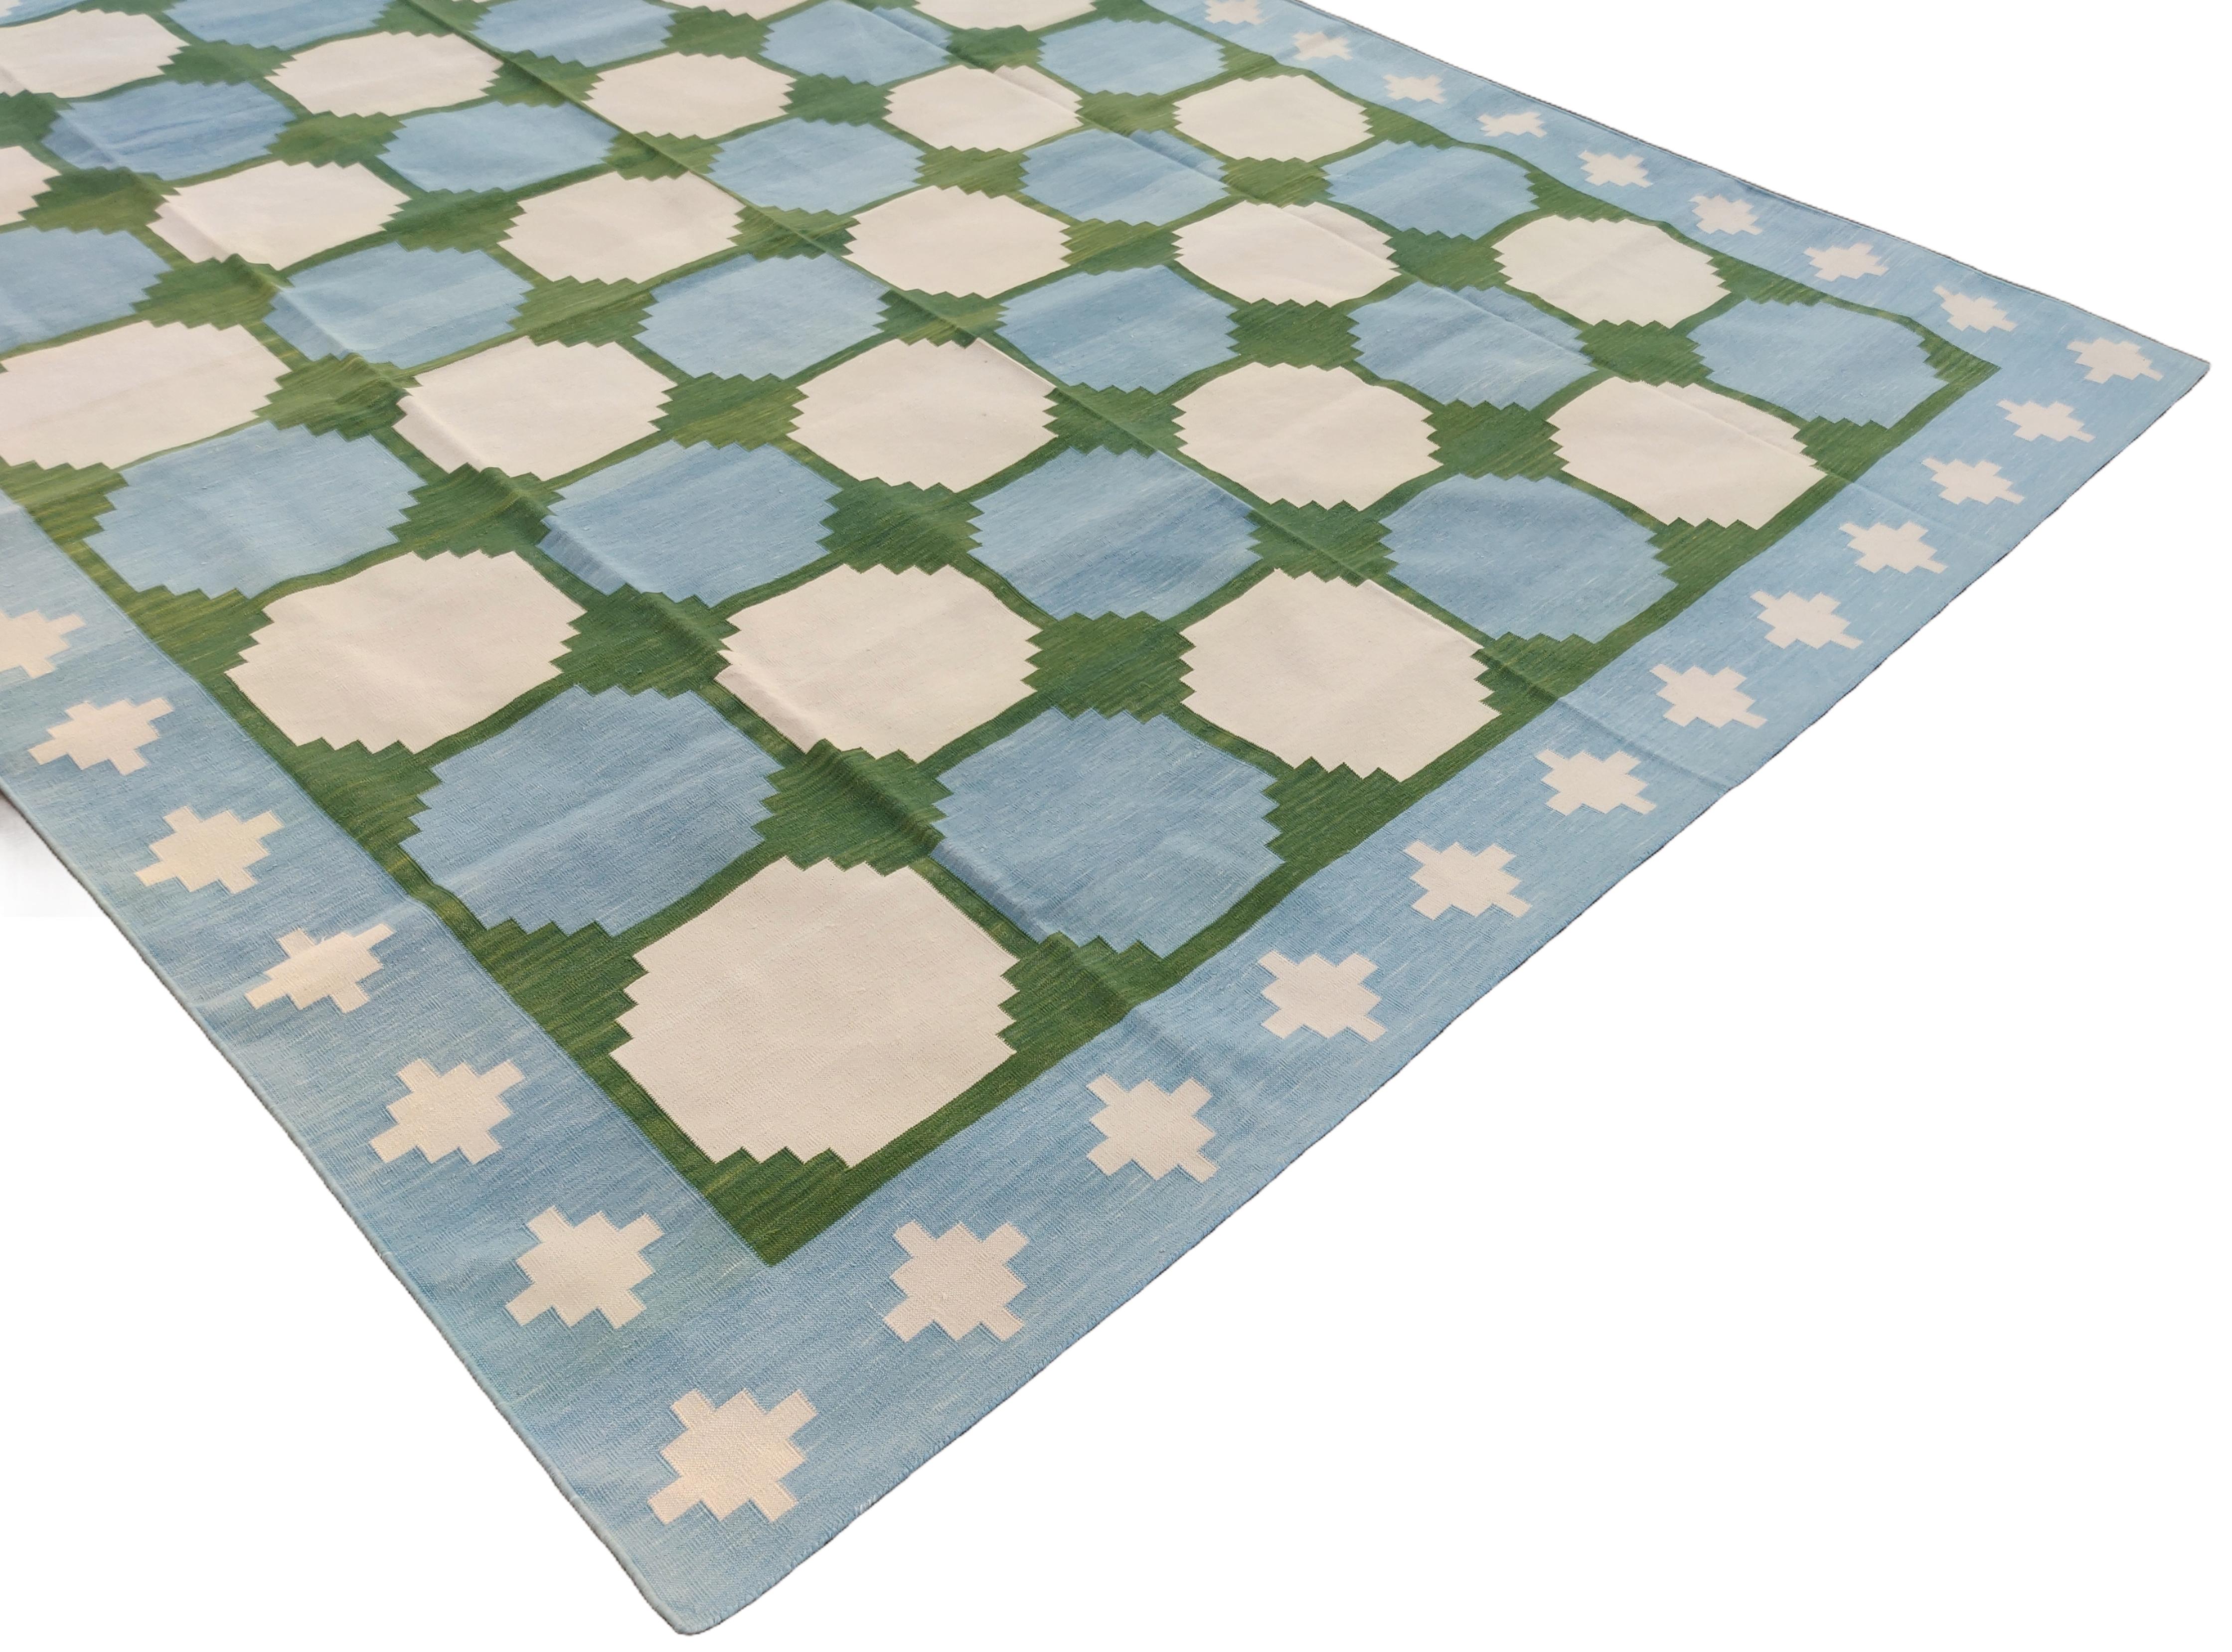 Handmade Cotton Flat Weave Rug, 9x12 Green And Blue Tile Pattern Indian Dhurrie In New Condition For Sale In Jaipur, IN